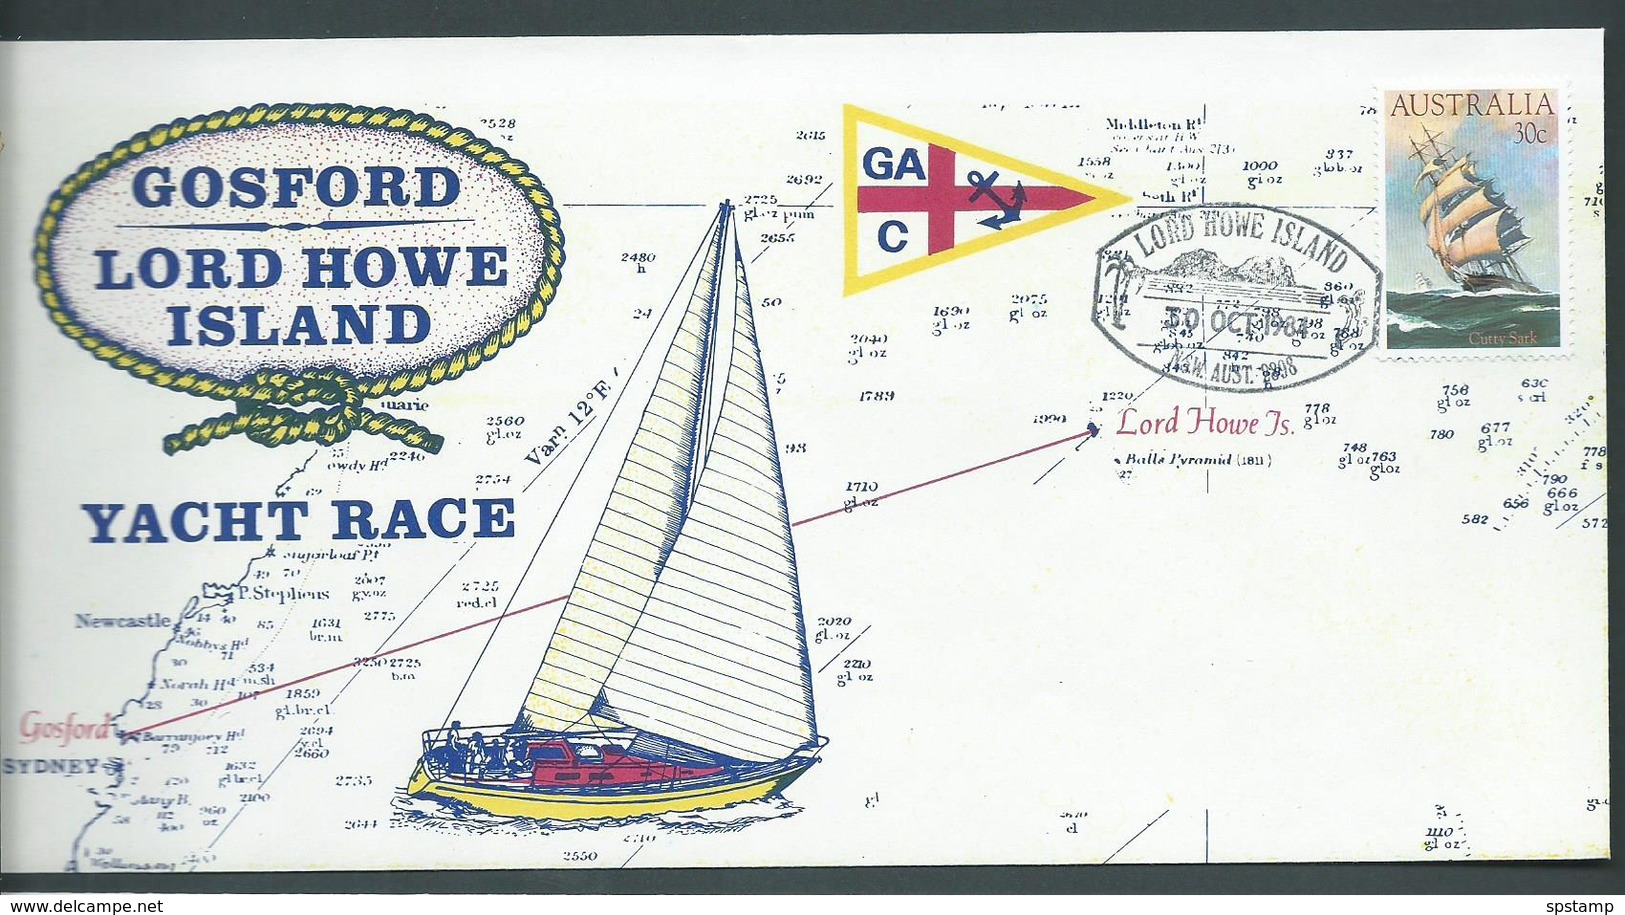 Australia 1984 Lord Howe Island - Gosford Yacht Race Illustrated Cover - Covers & Documents